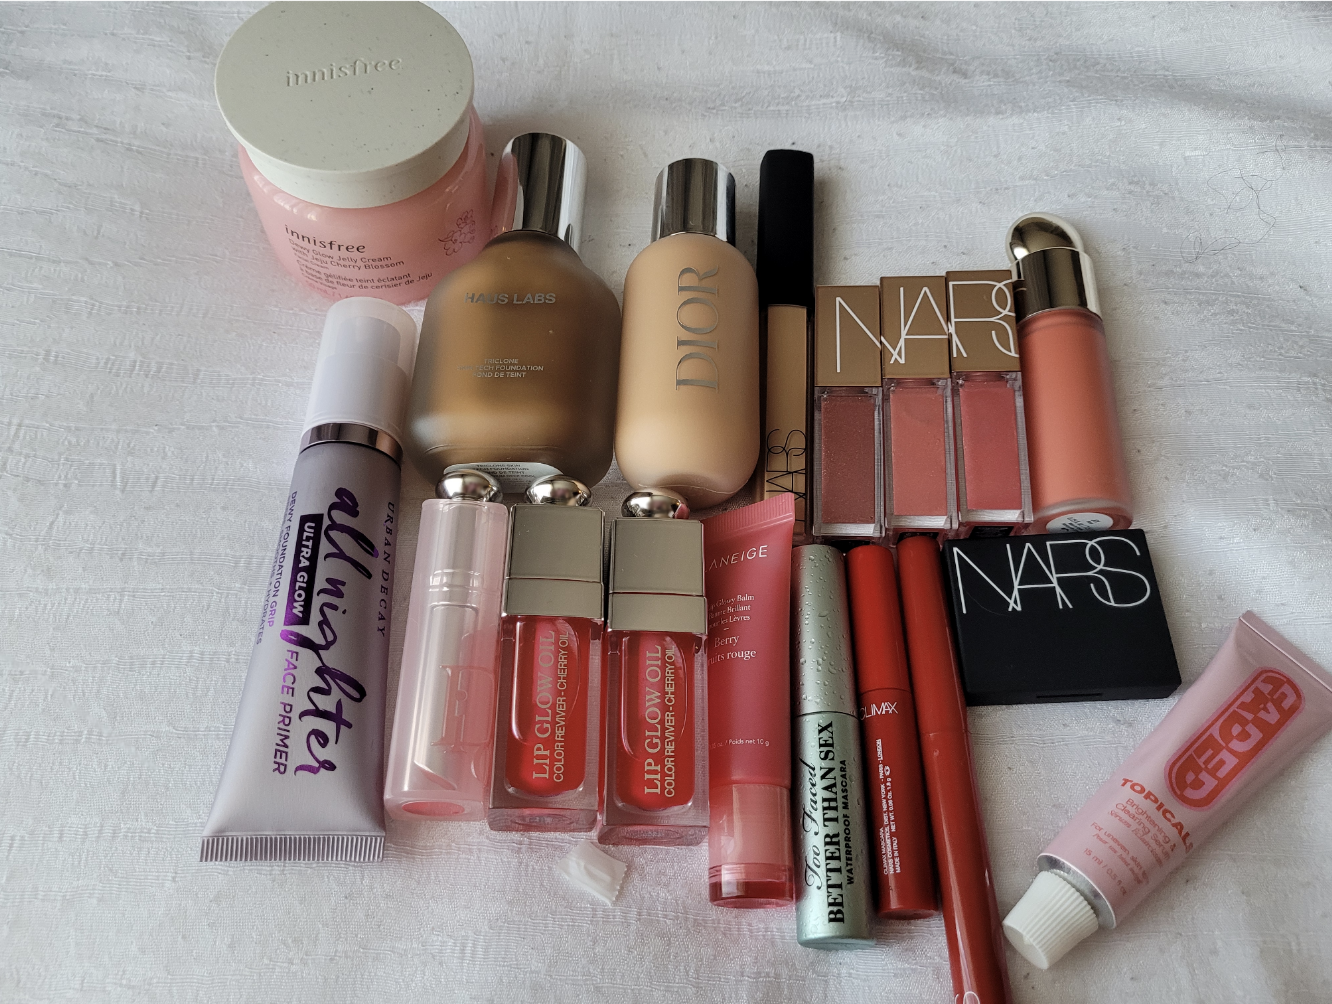 A spread of products including nars lip balms, dior lip balms, and dior foundation